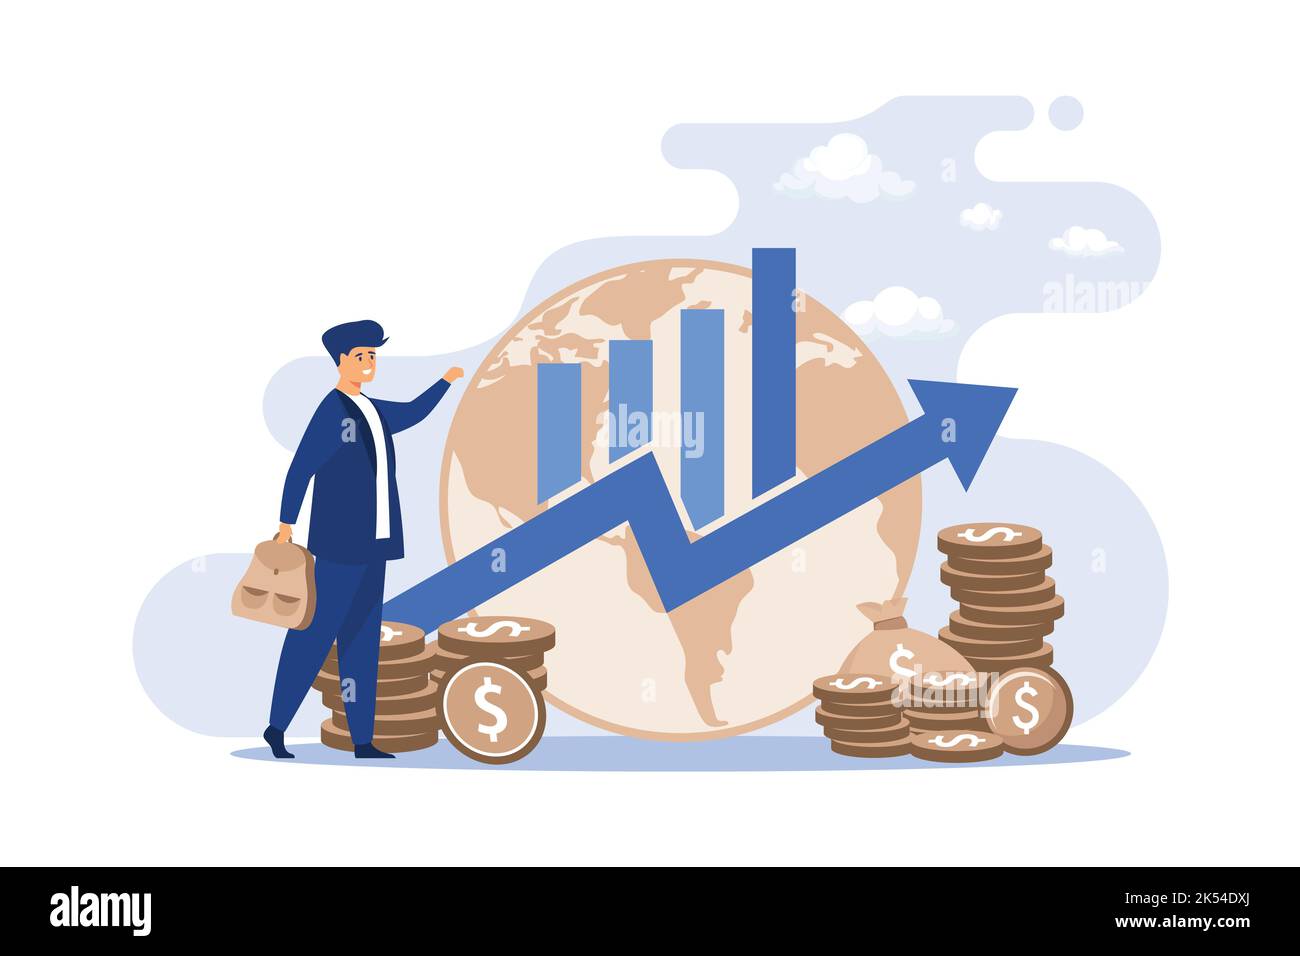 Gross domestic product concept. Growth arrow chart with globe, stacks of money, happy tiny professional. flat design modern illustration Stock Vector